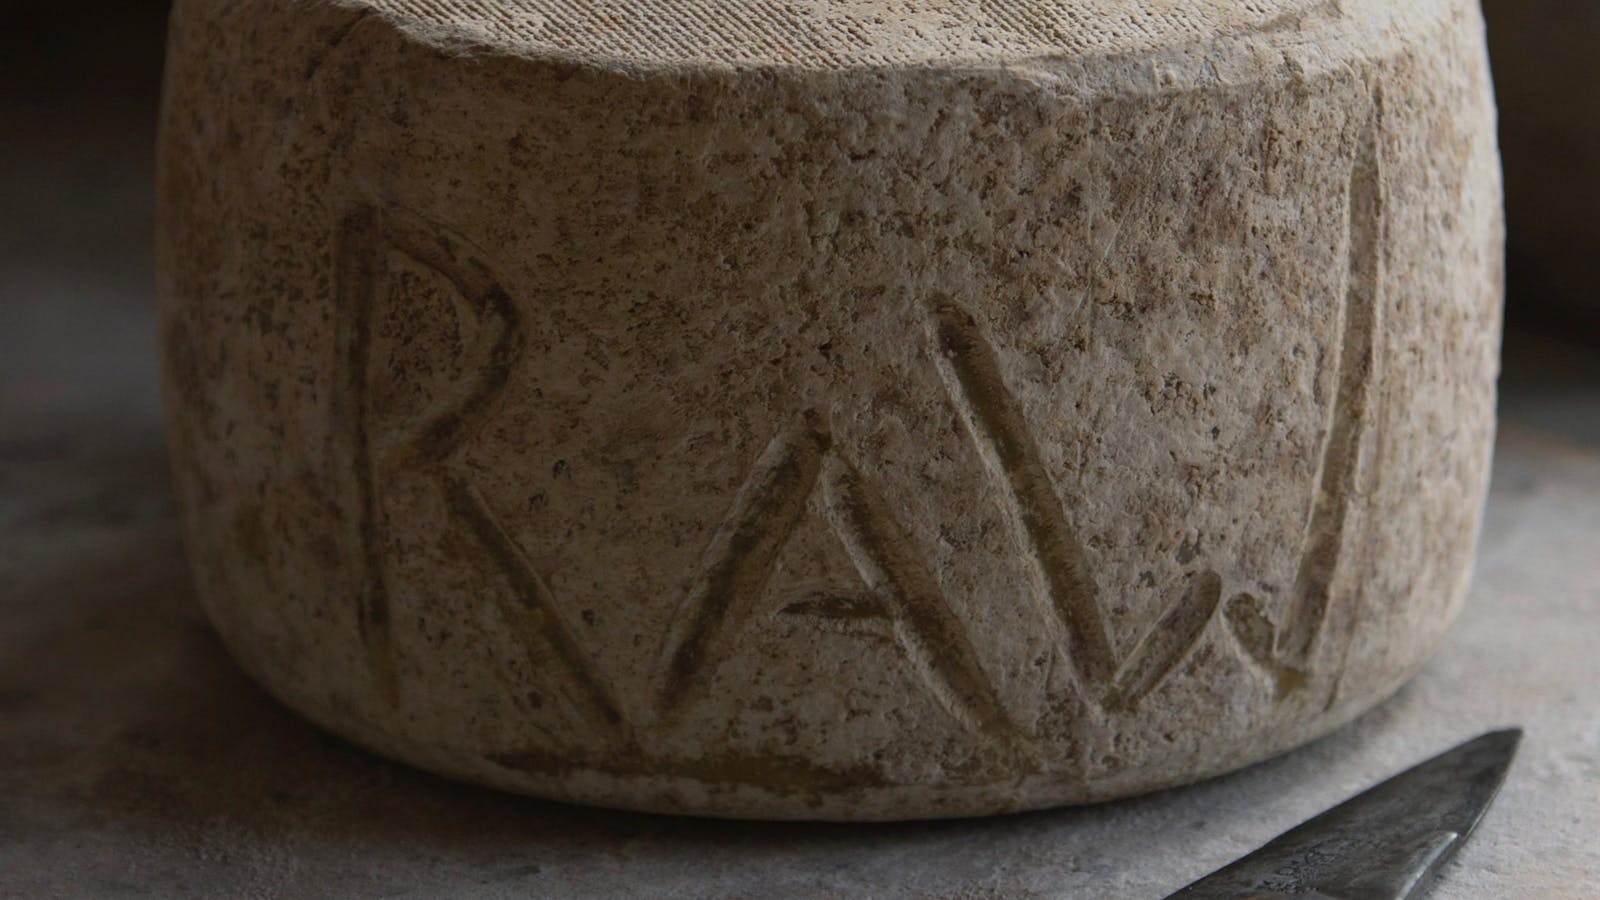 Raw Milk C2, the first raw milk cheese produced in Australia